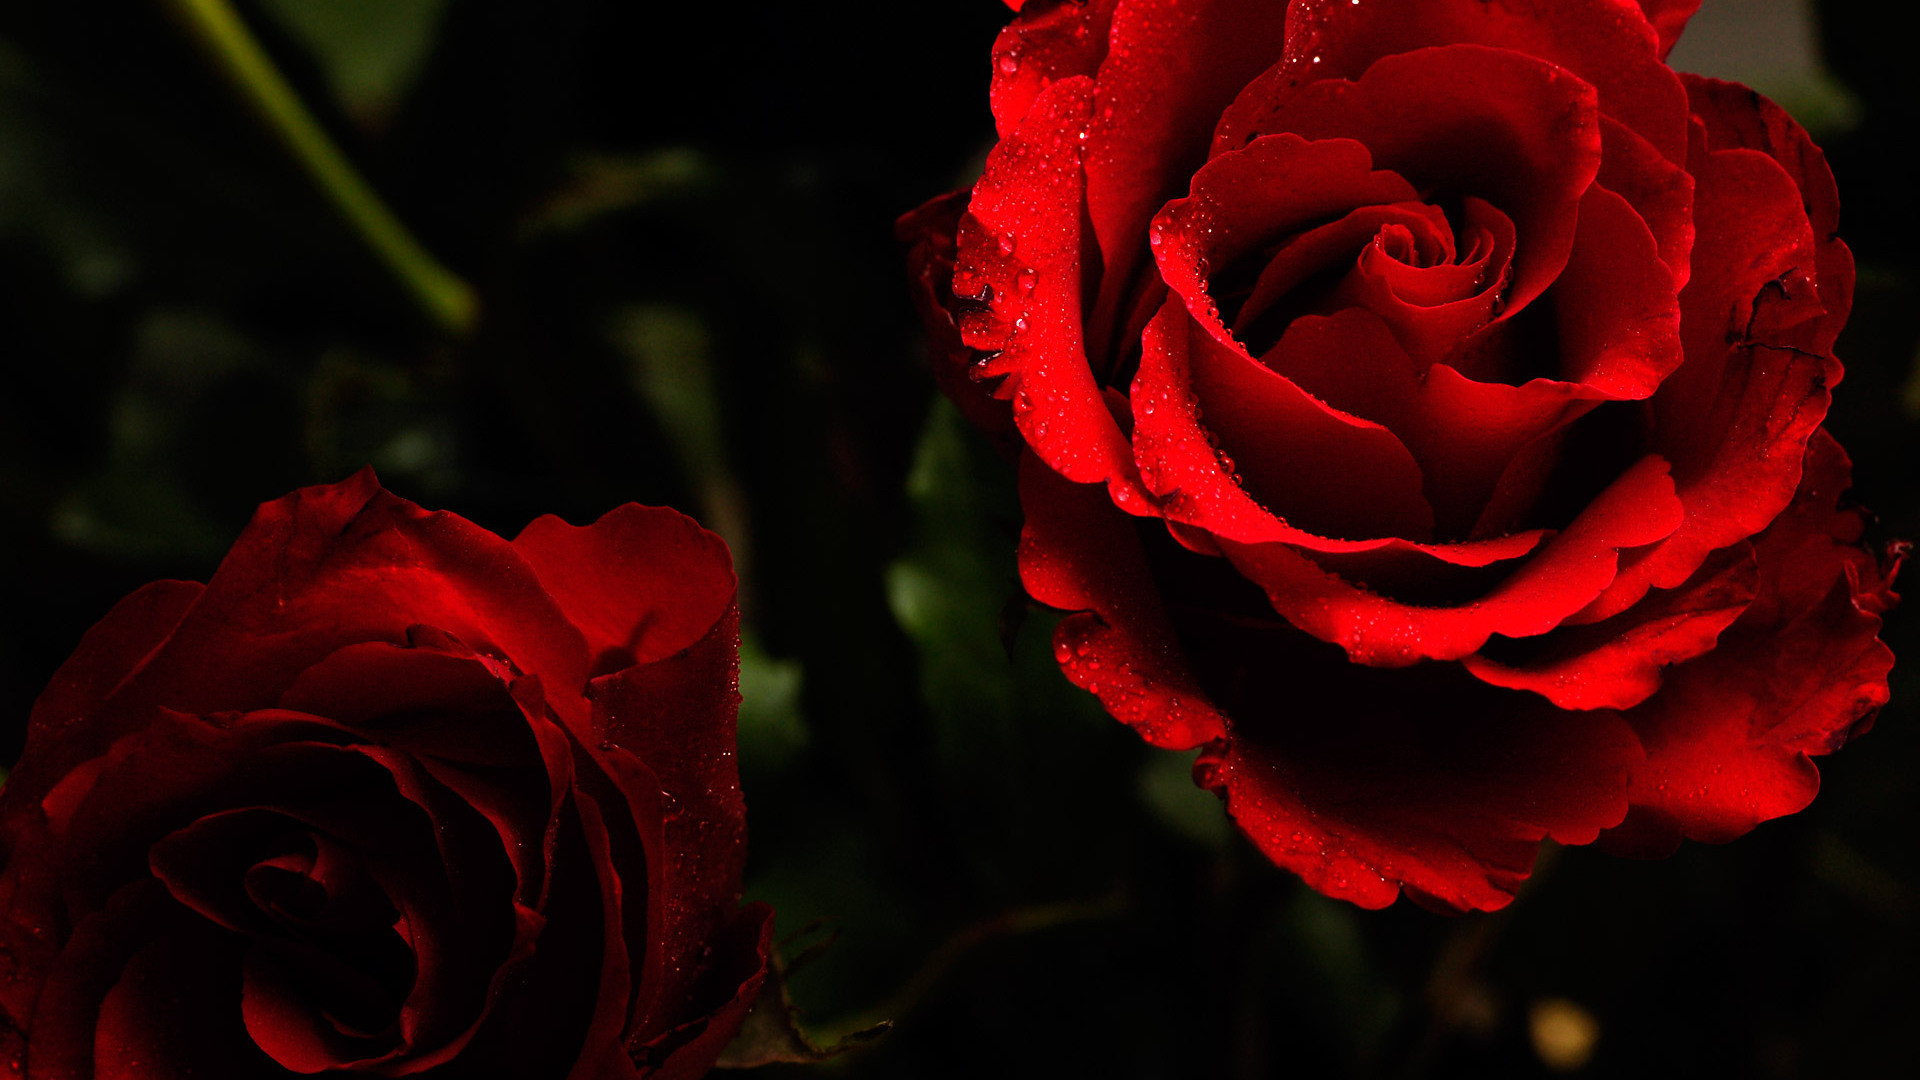 Roses With Black Background (50+ images)